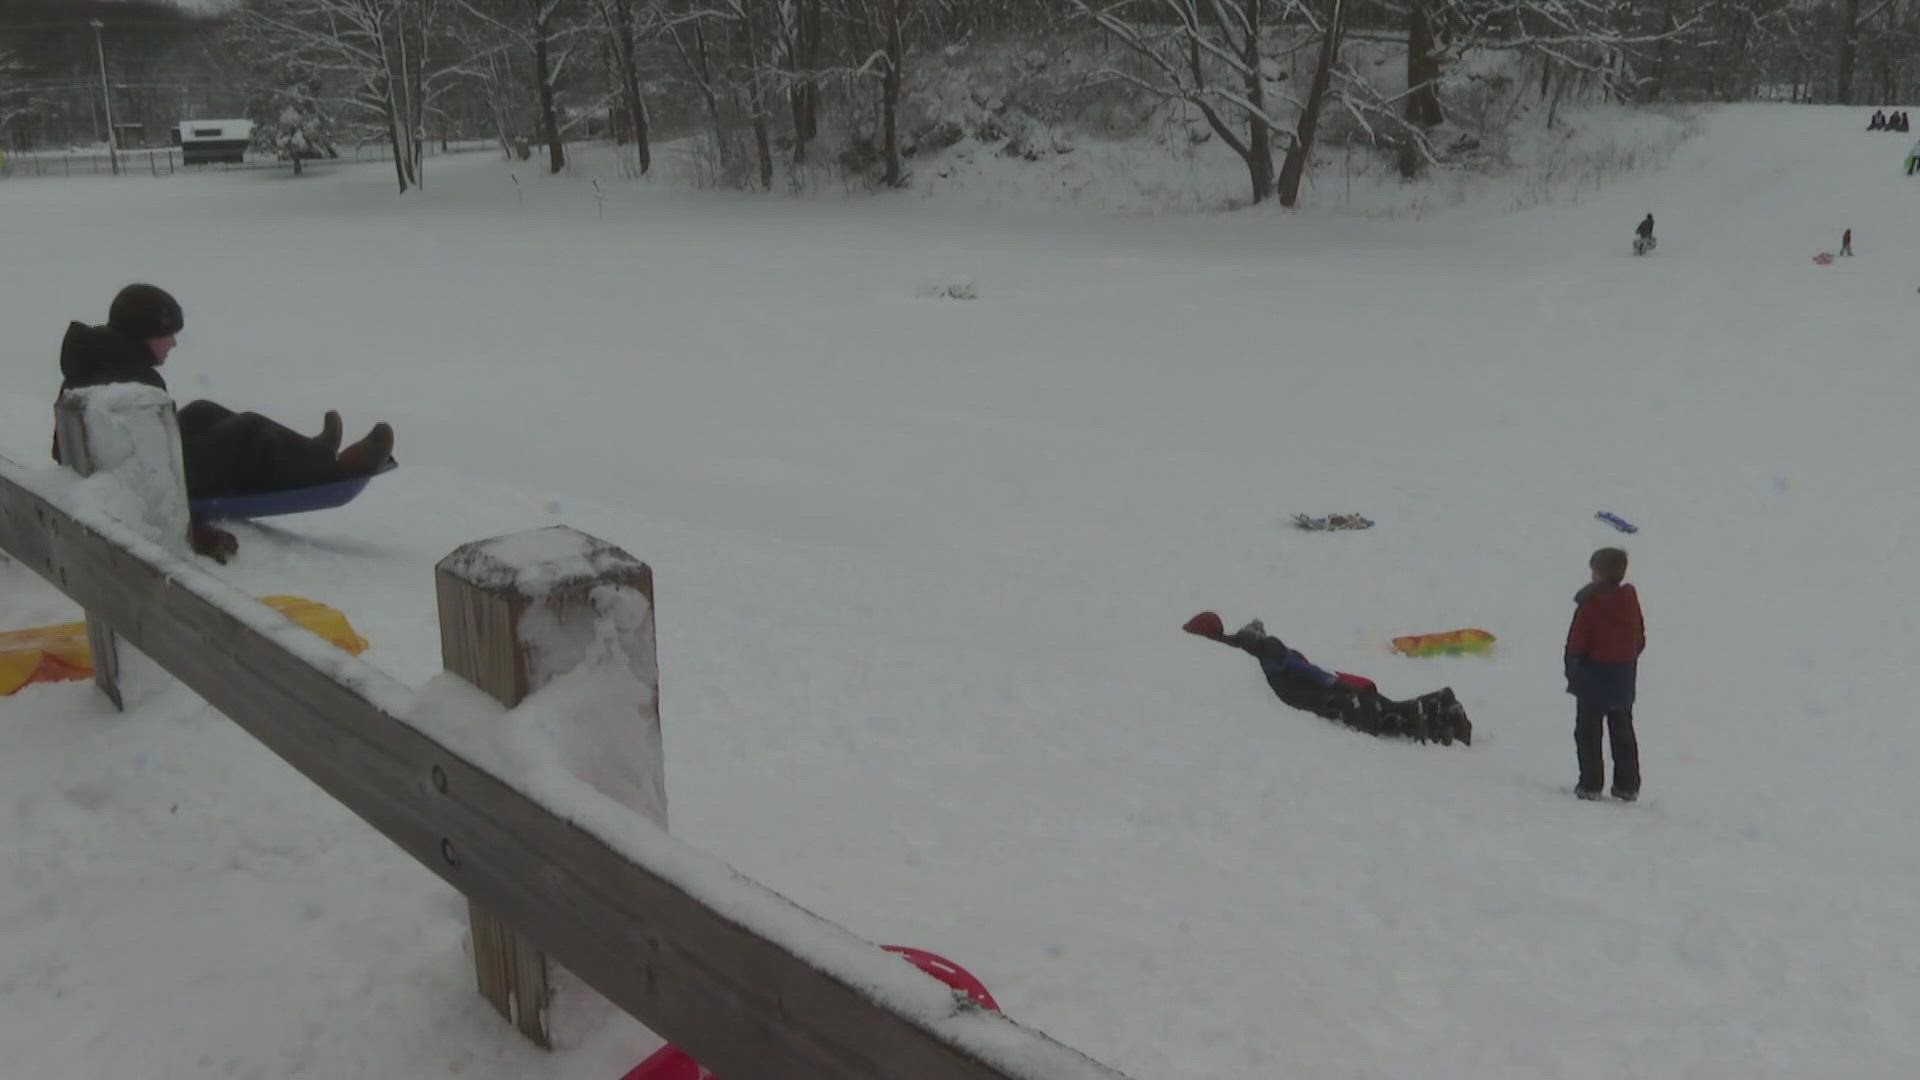 For many kids across Maine, Monday was their first snow day of the winter season.